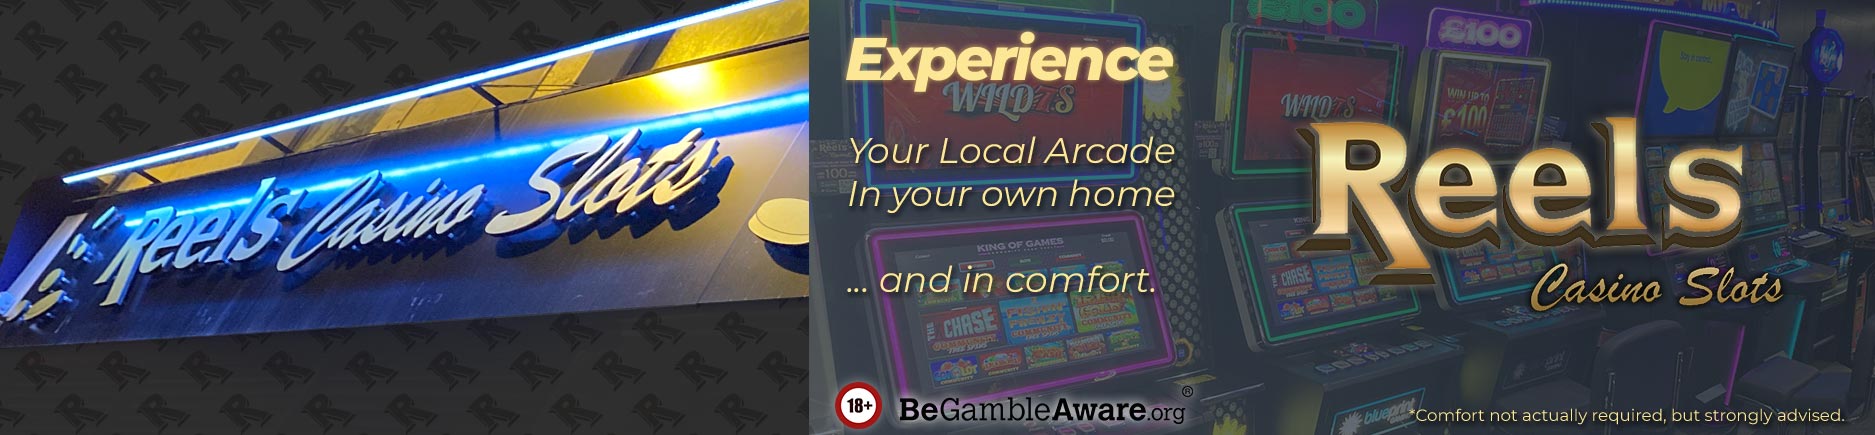 Experience your Local Arcade in your own home...and in comfort!